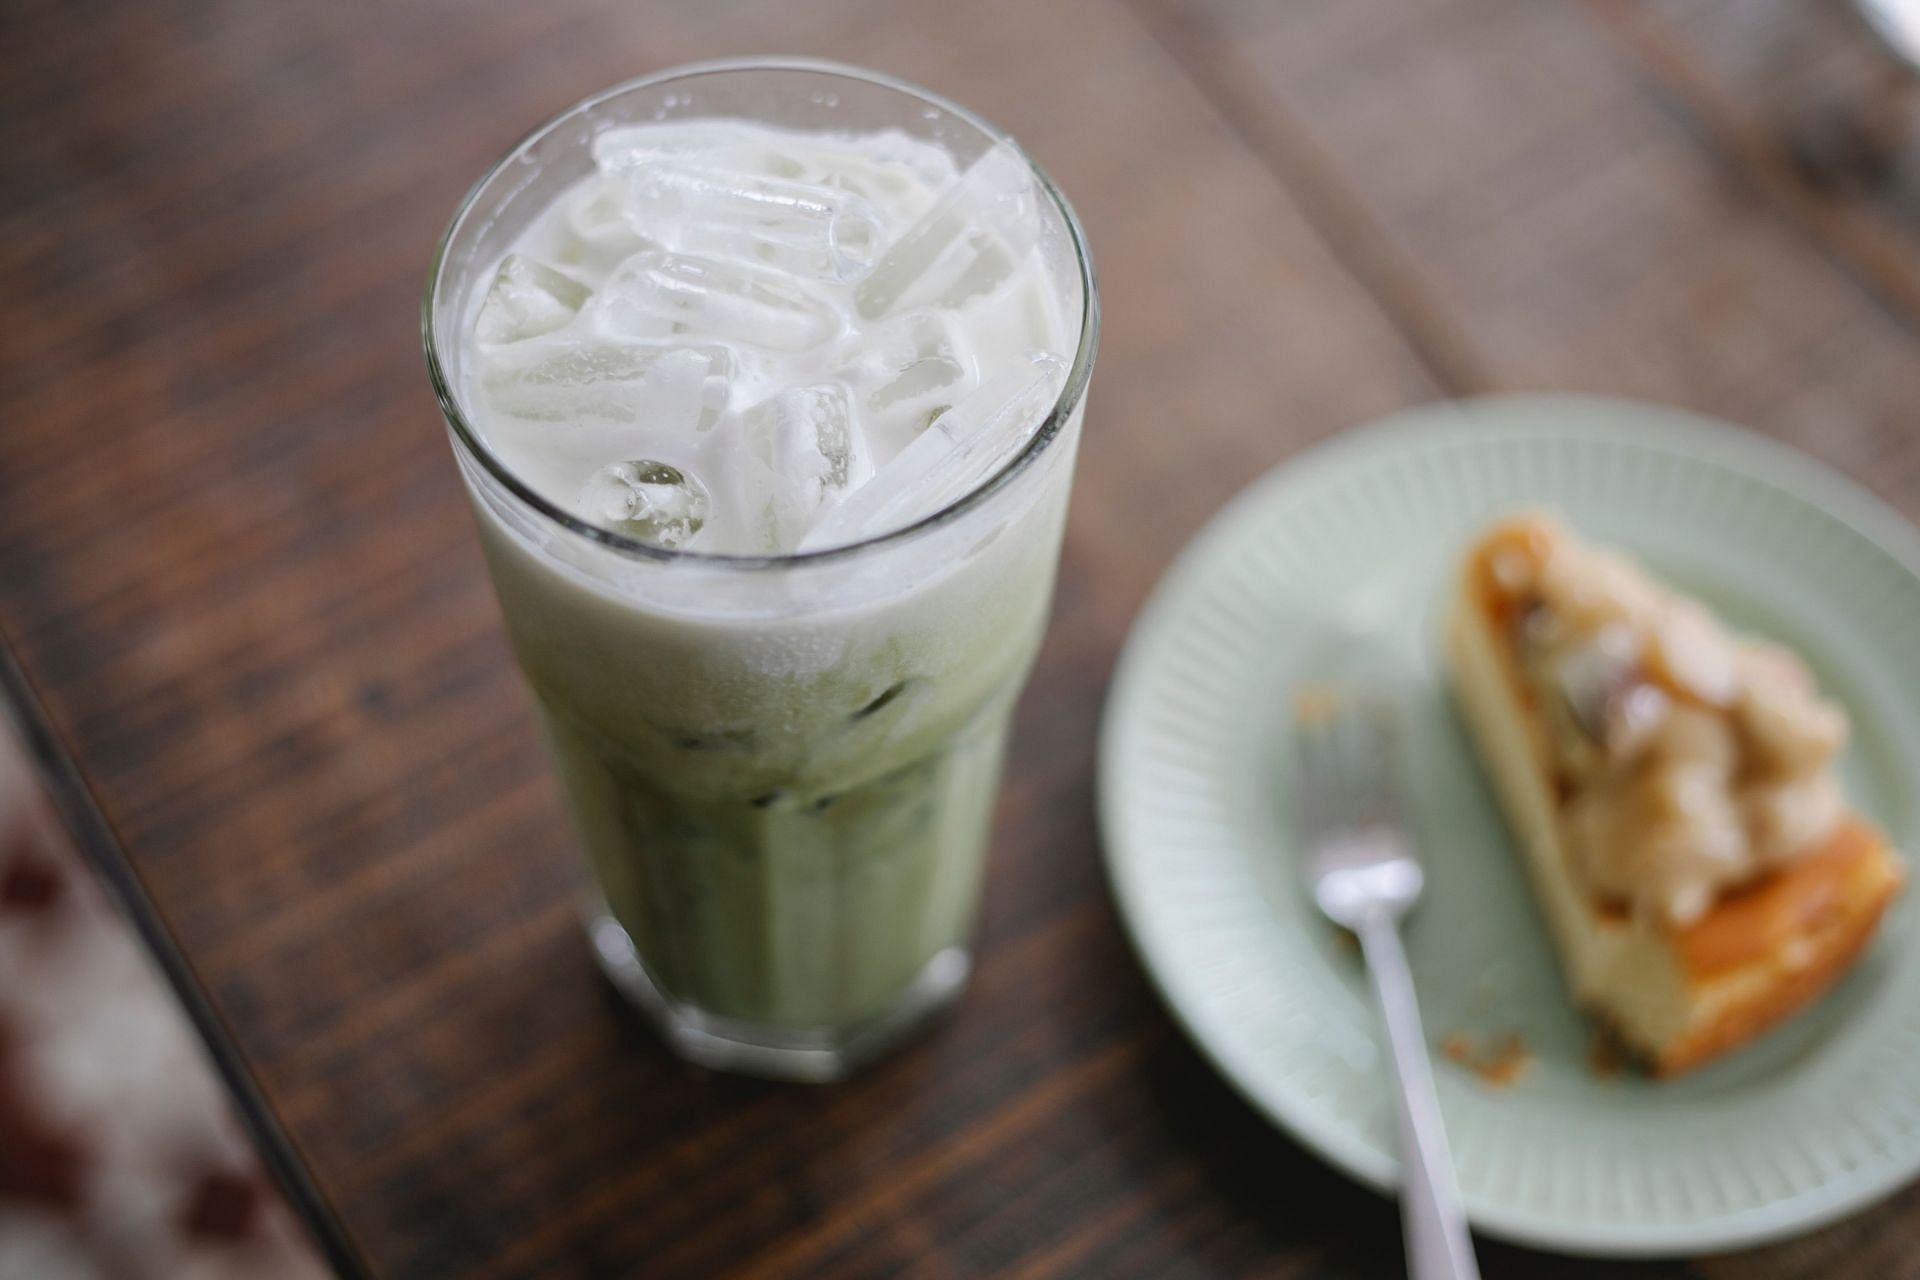 classic grade is one of the common matcha grades (image via pexels / charlotte may)